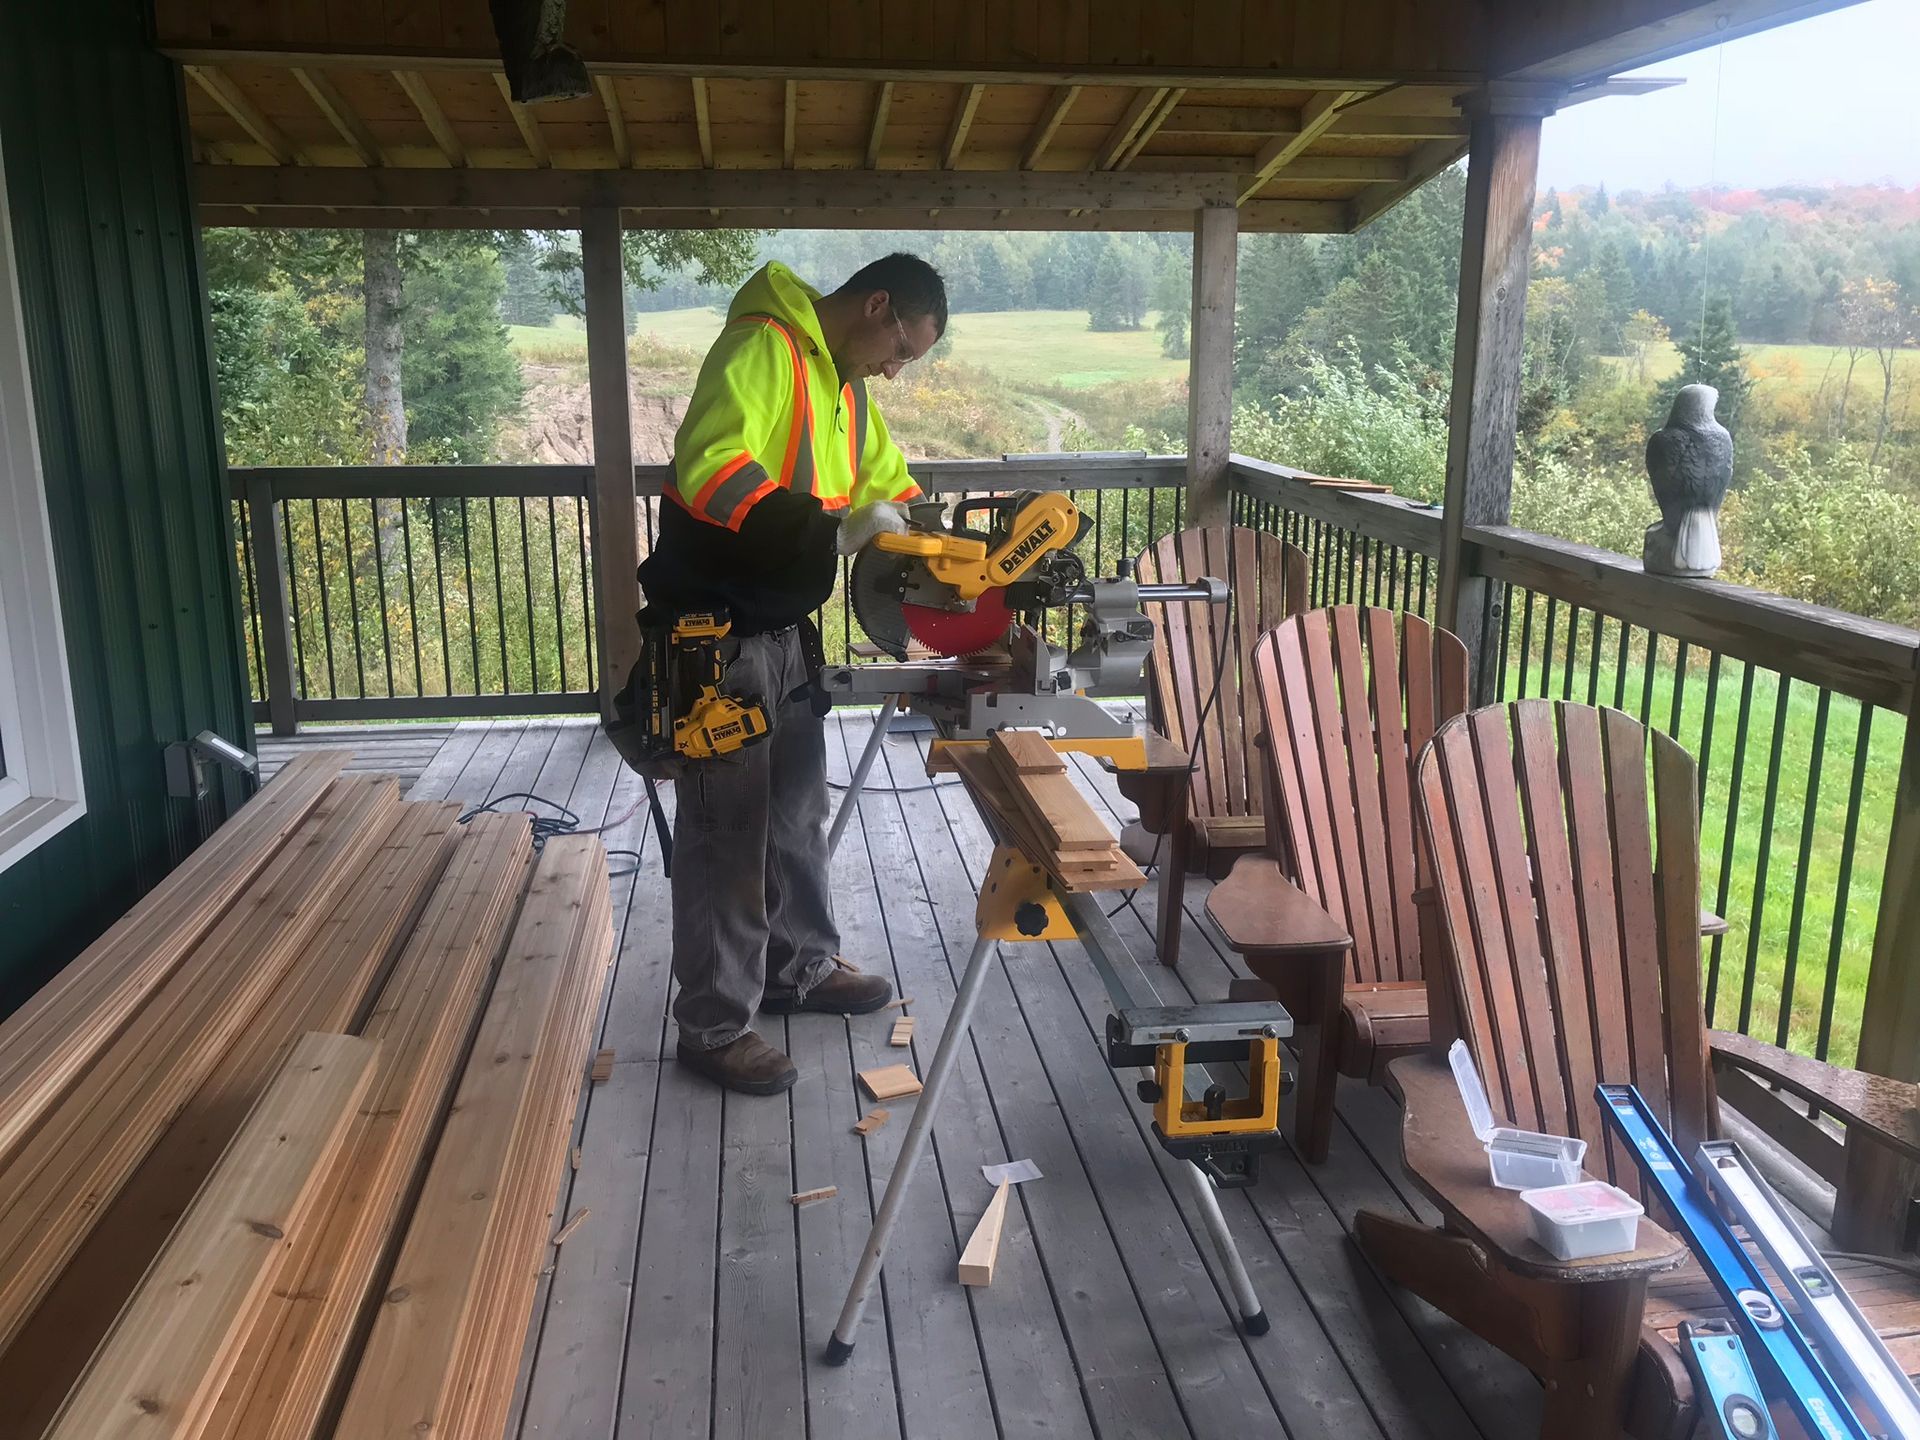 a man is cutting wood on a porch with a circular saw